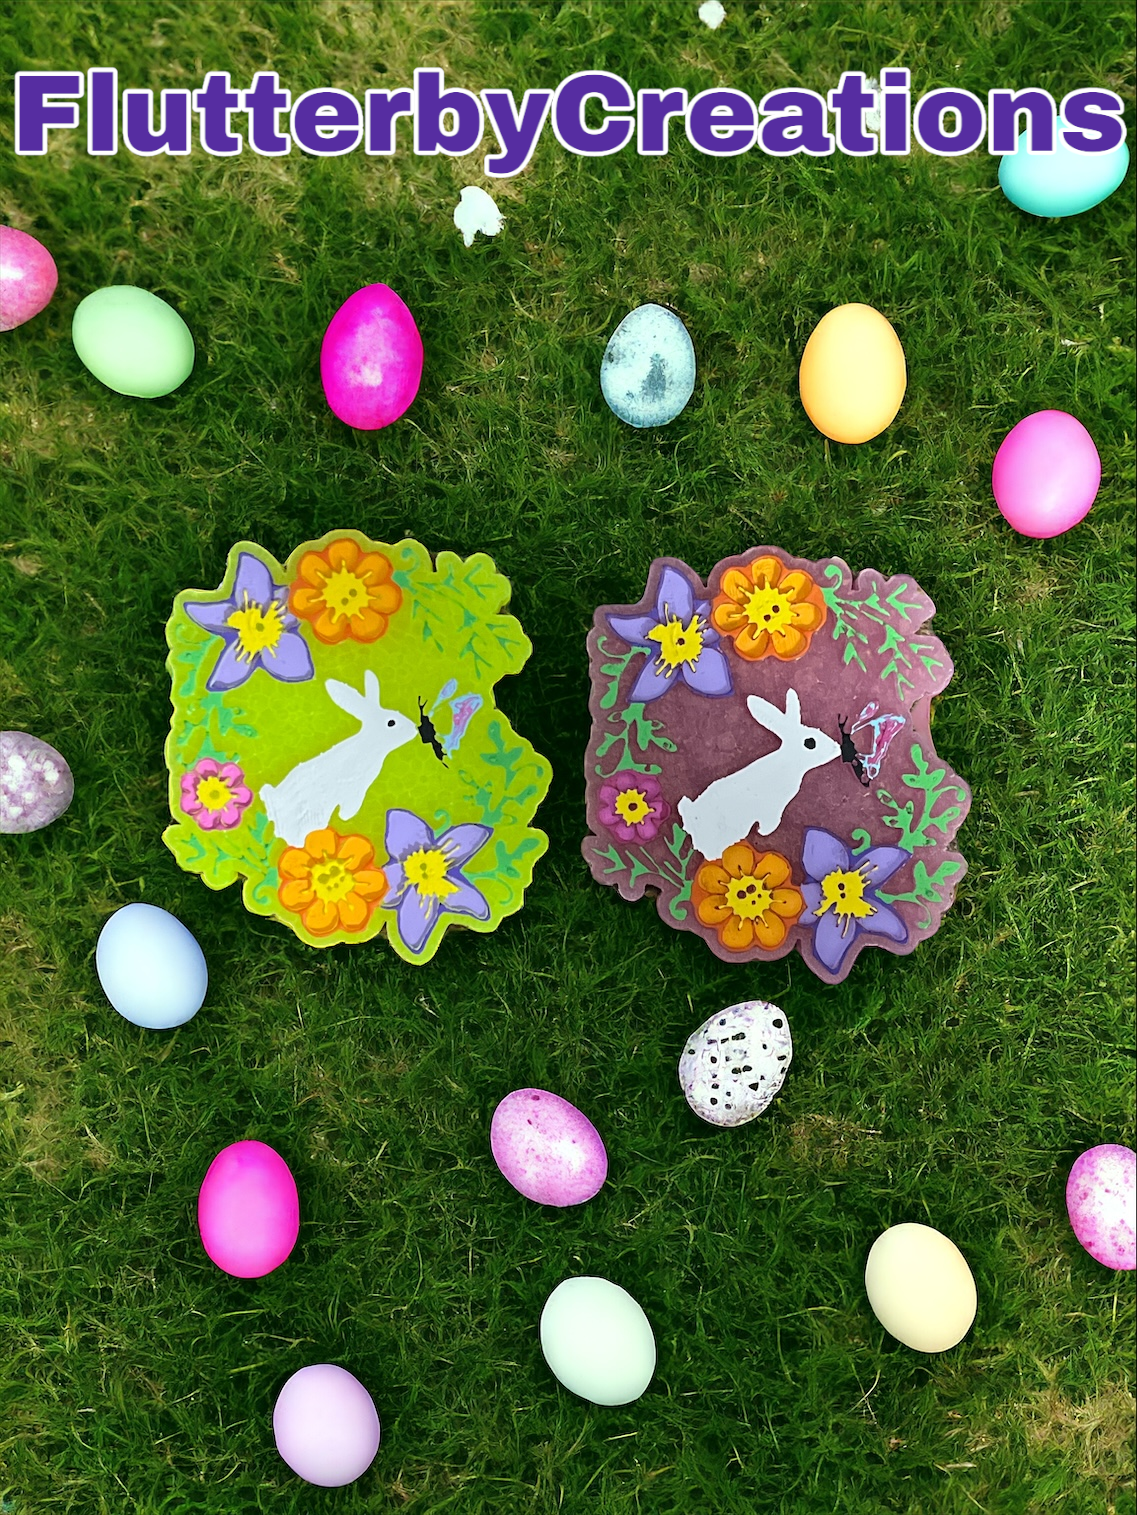 a picture of some easter eggs on the grass